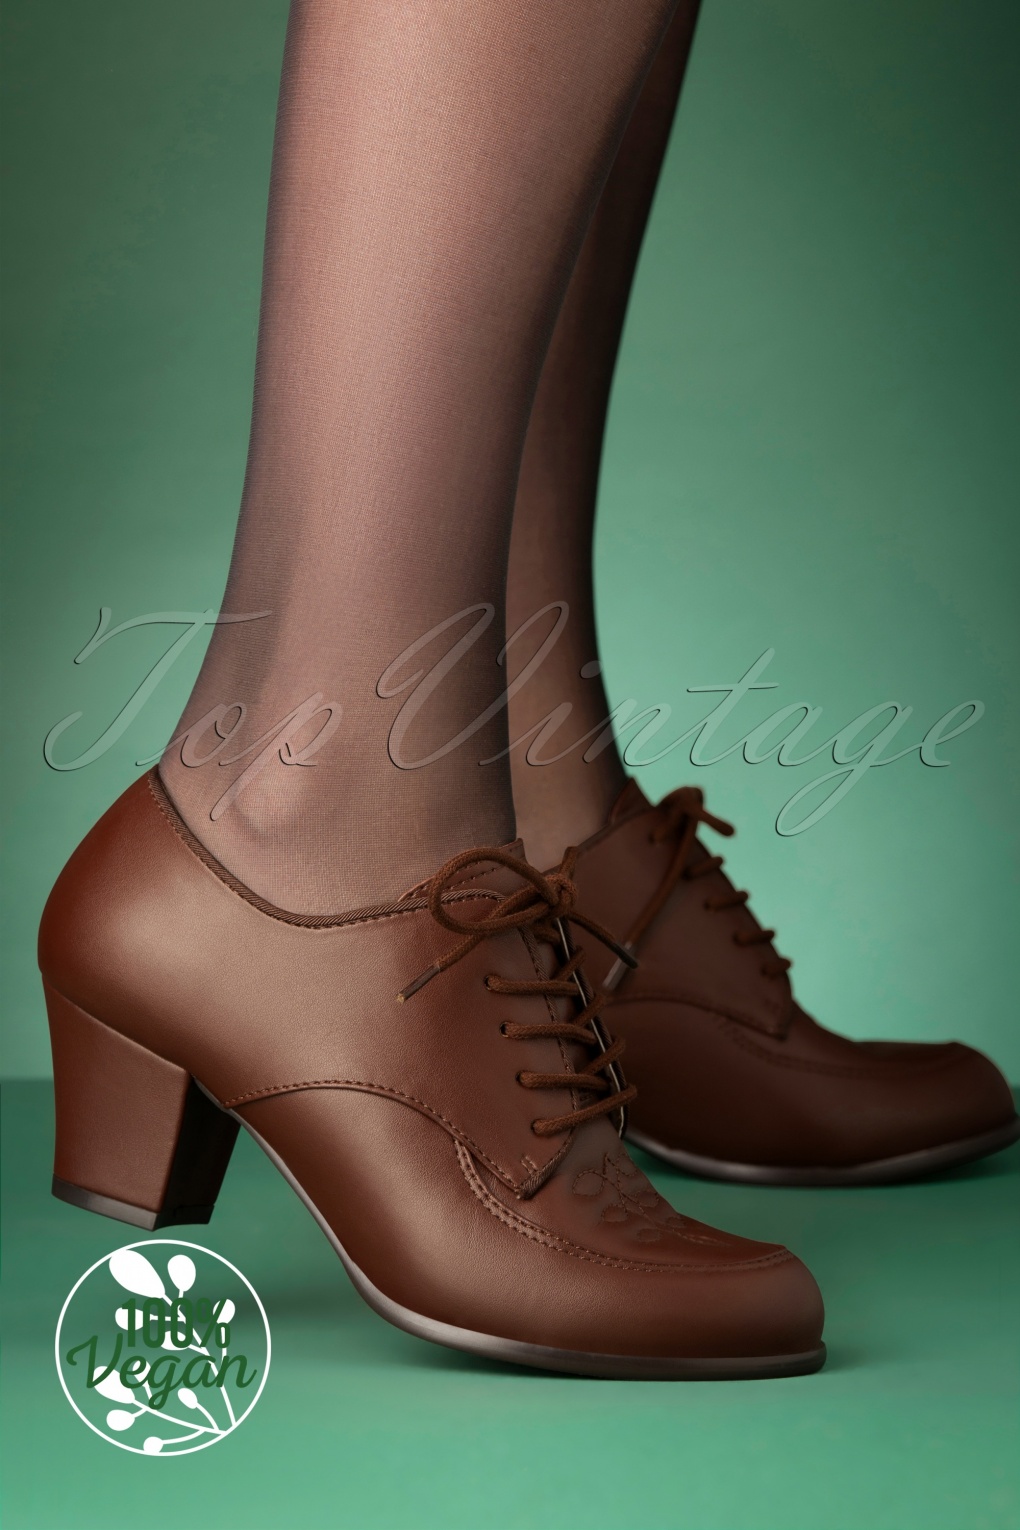 10 Popular 1940s Shoes Styles for Women